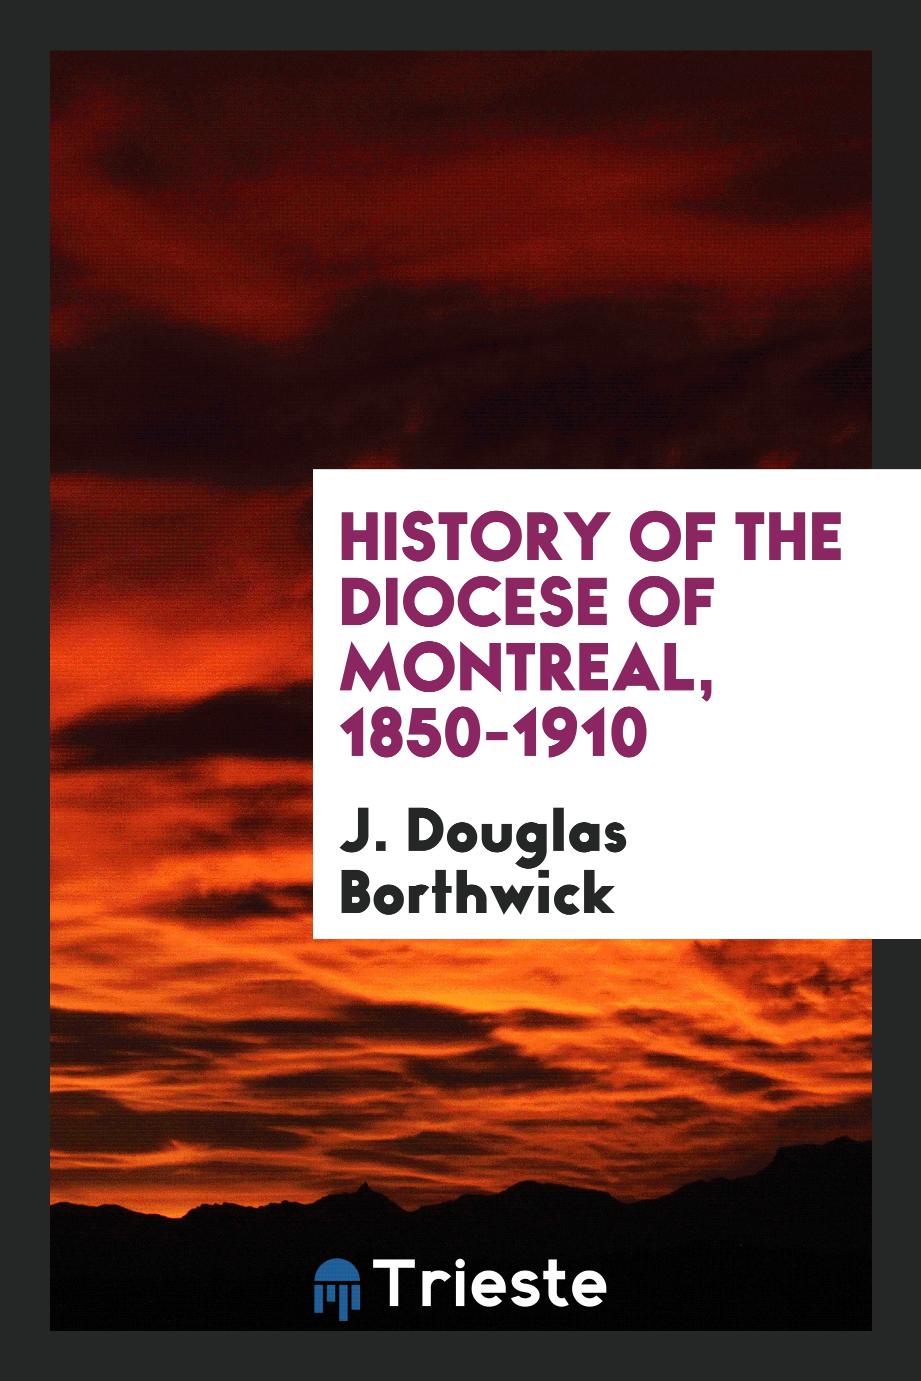 History of the diocese of Montreal, 1850-1910